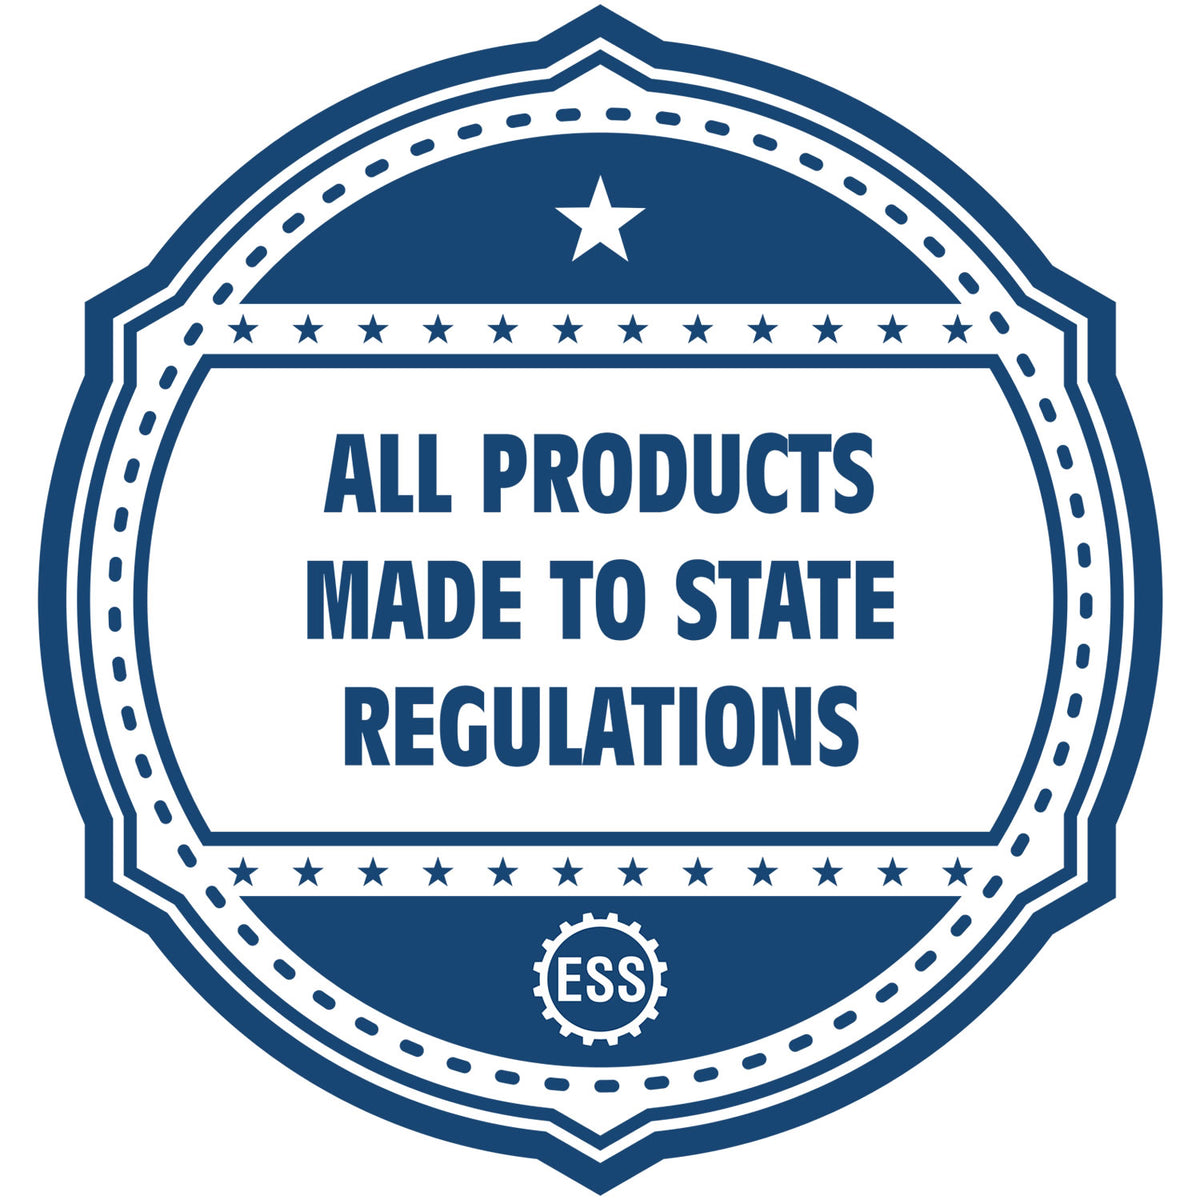 A blue icon or badge for the Slim Pre-Inked Iowa Professional Geologist Seal Stamp showing that this product is made in compliance with state regulations.